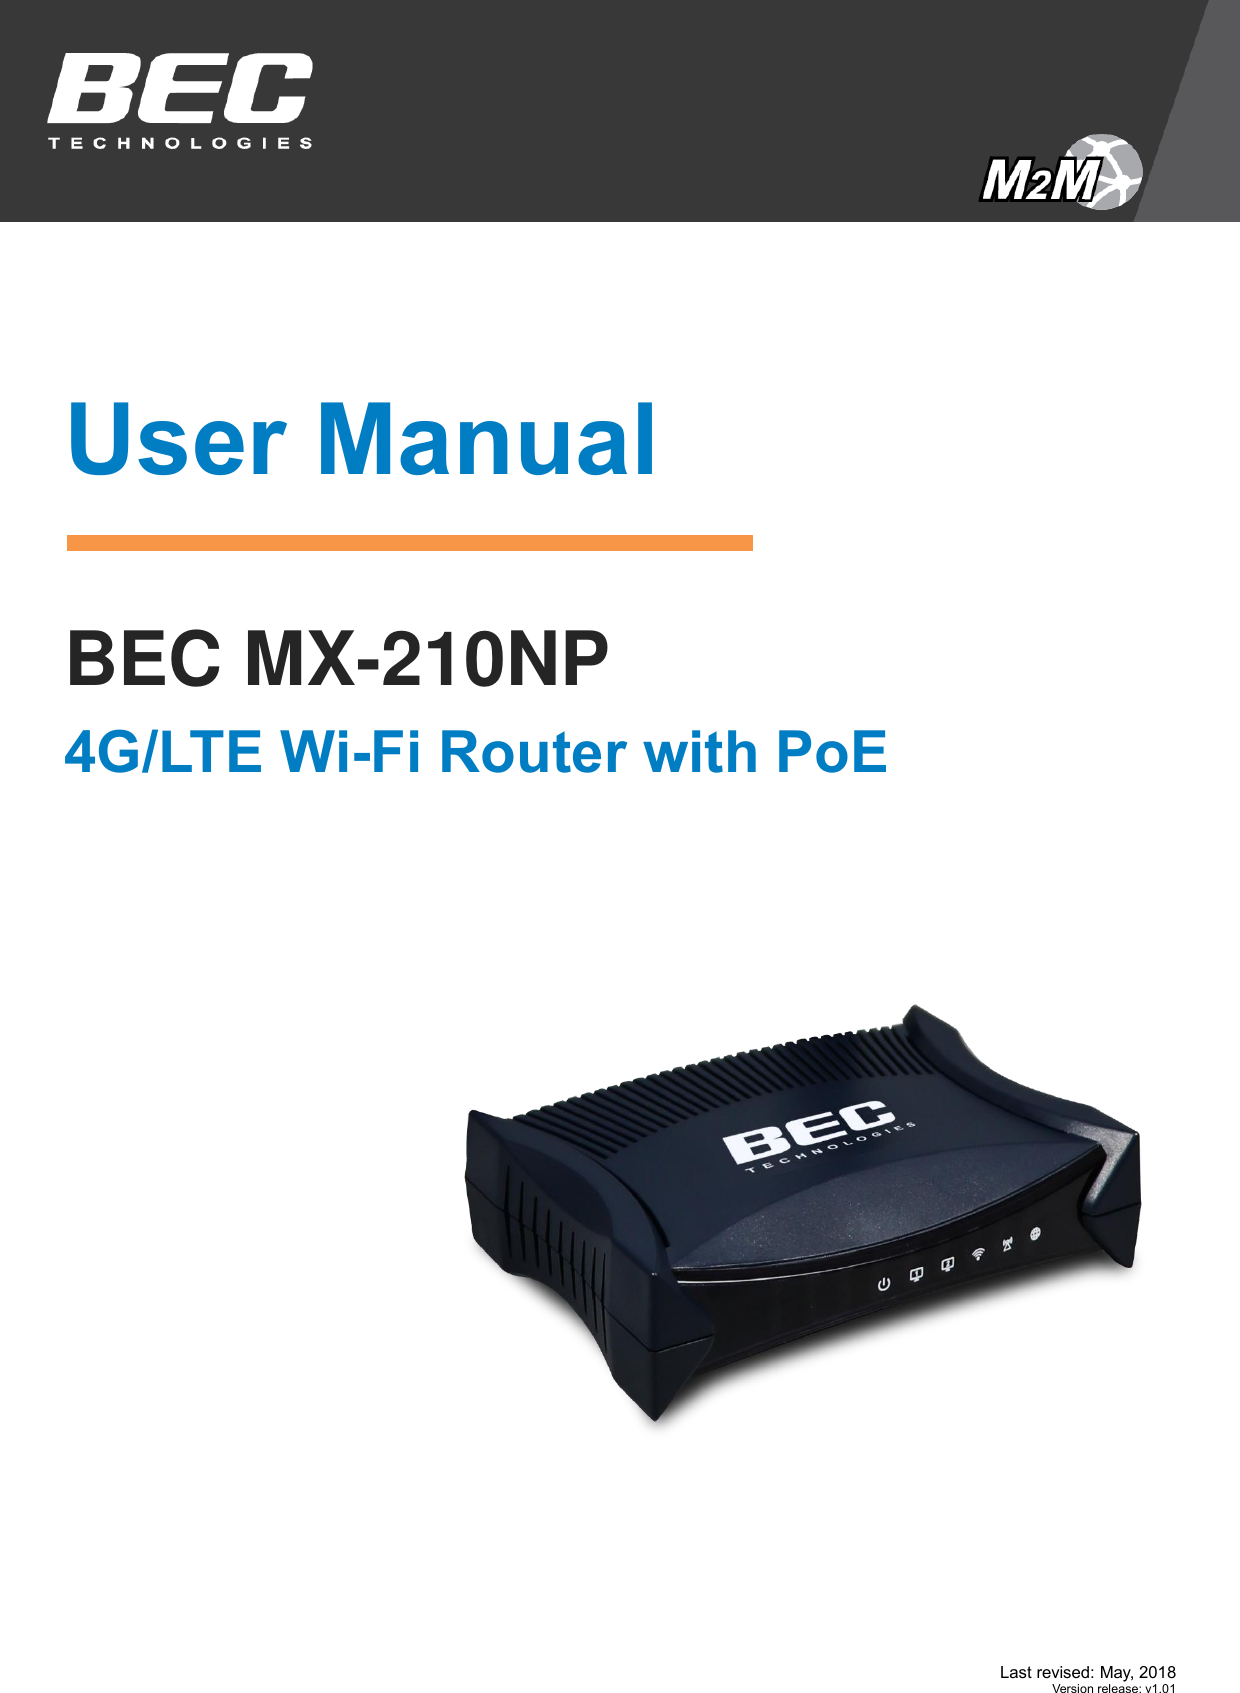  Last revised: May, 2018  Version release: v1.01         User Manual  BEC MX-210NP 4G/LTE Wi-Fi Router with PoE              